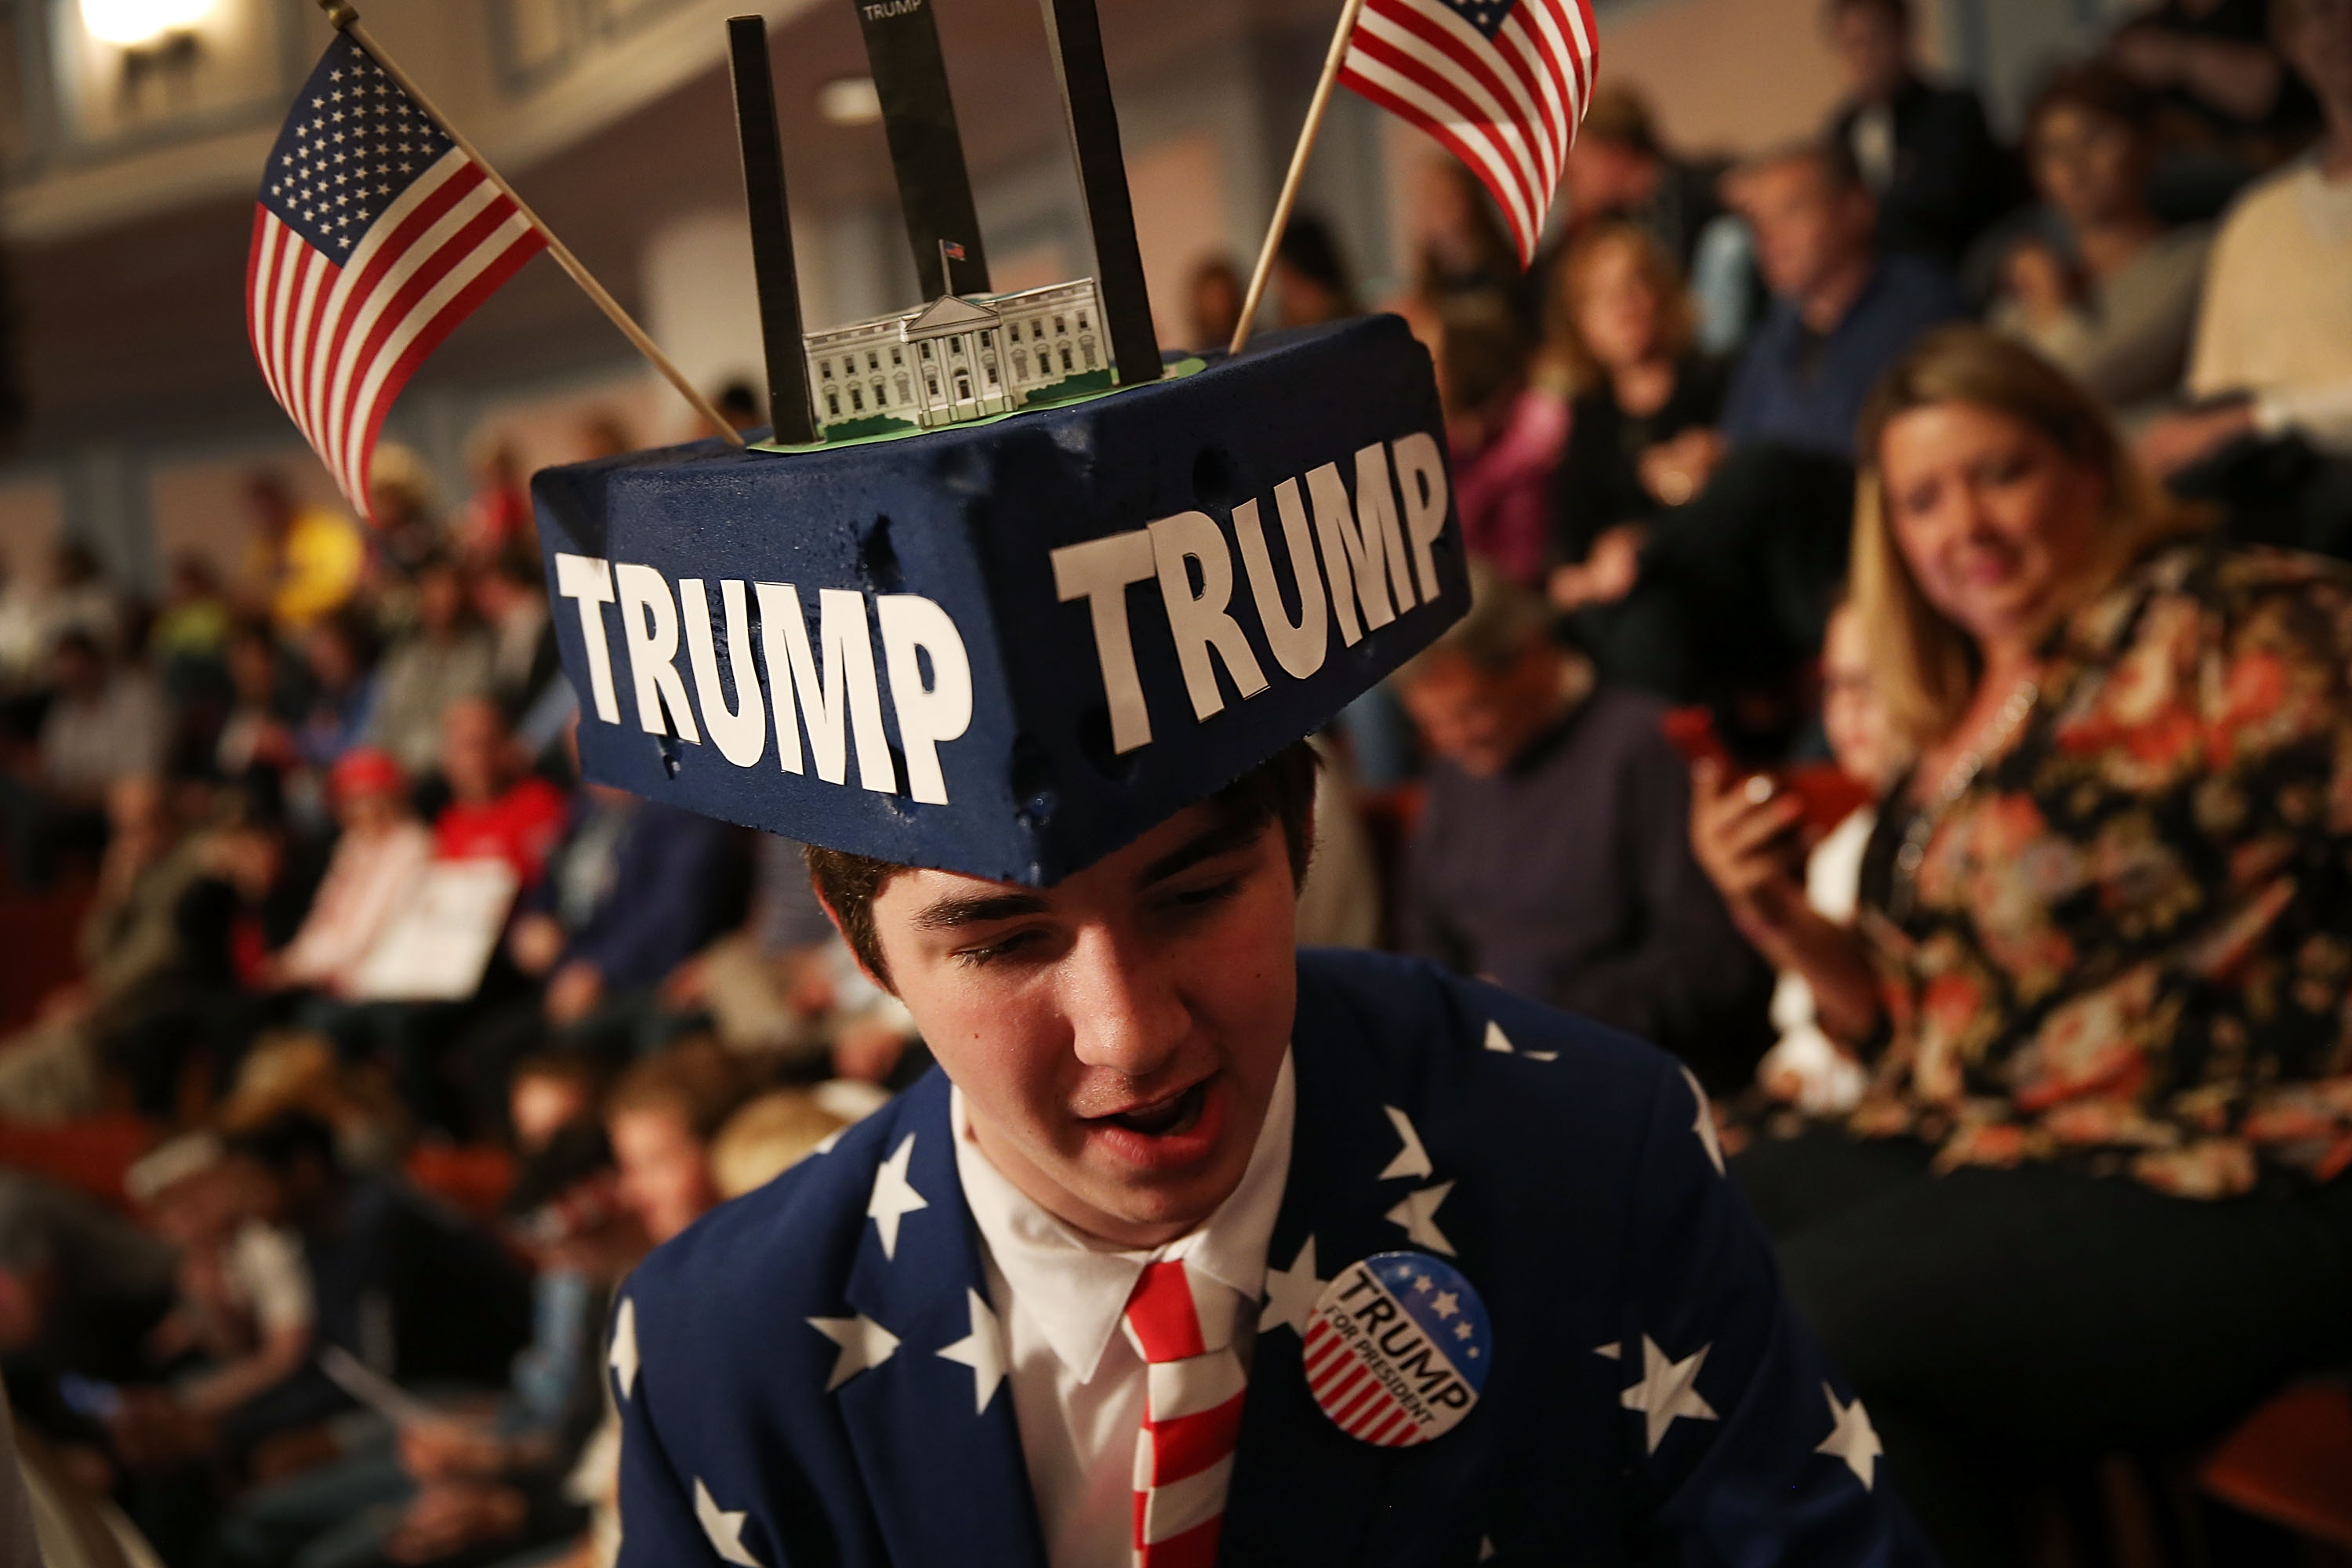 Michael Kuzma shows his support for Republican presidential candidate Donald Trump  during his campaign stop at the Palladium at the Center for the Performing Arts on May 2, 2016 in Carmel, Indiana. Trump continues to campaign leading up to the state of Indiana's primary day on Tuesday.  